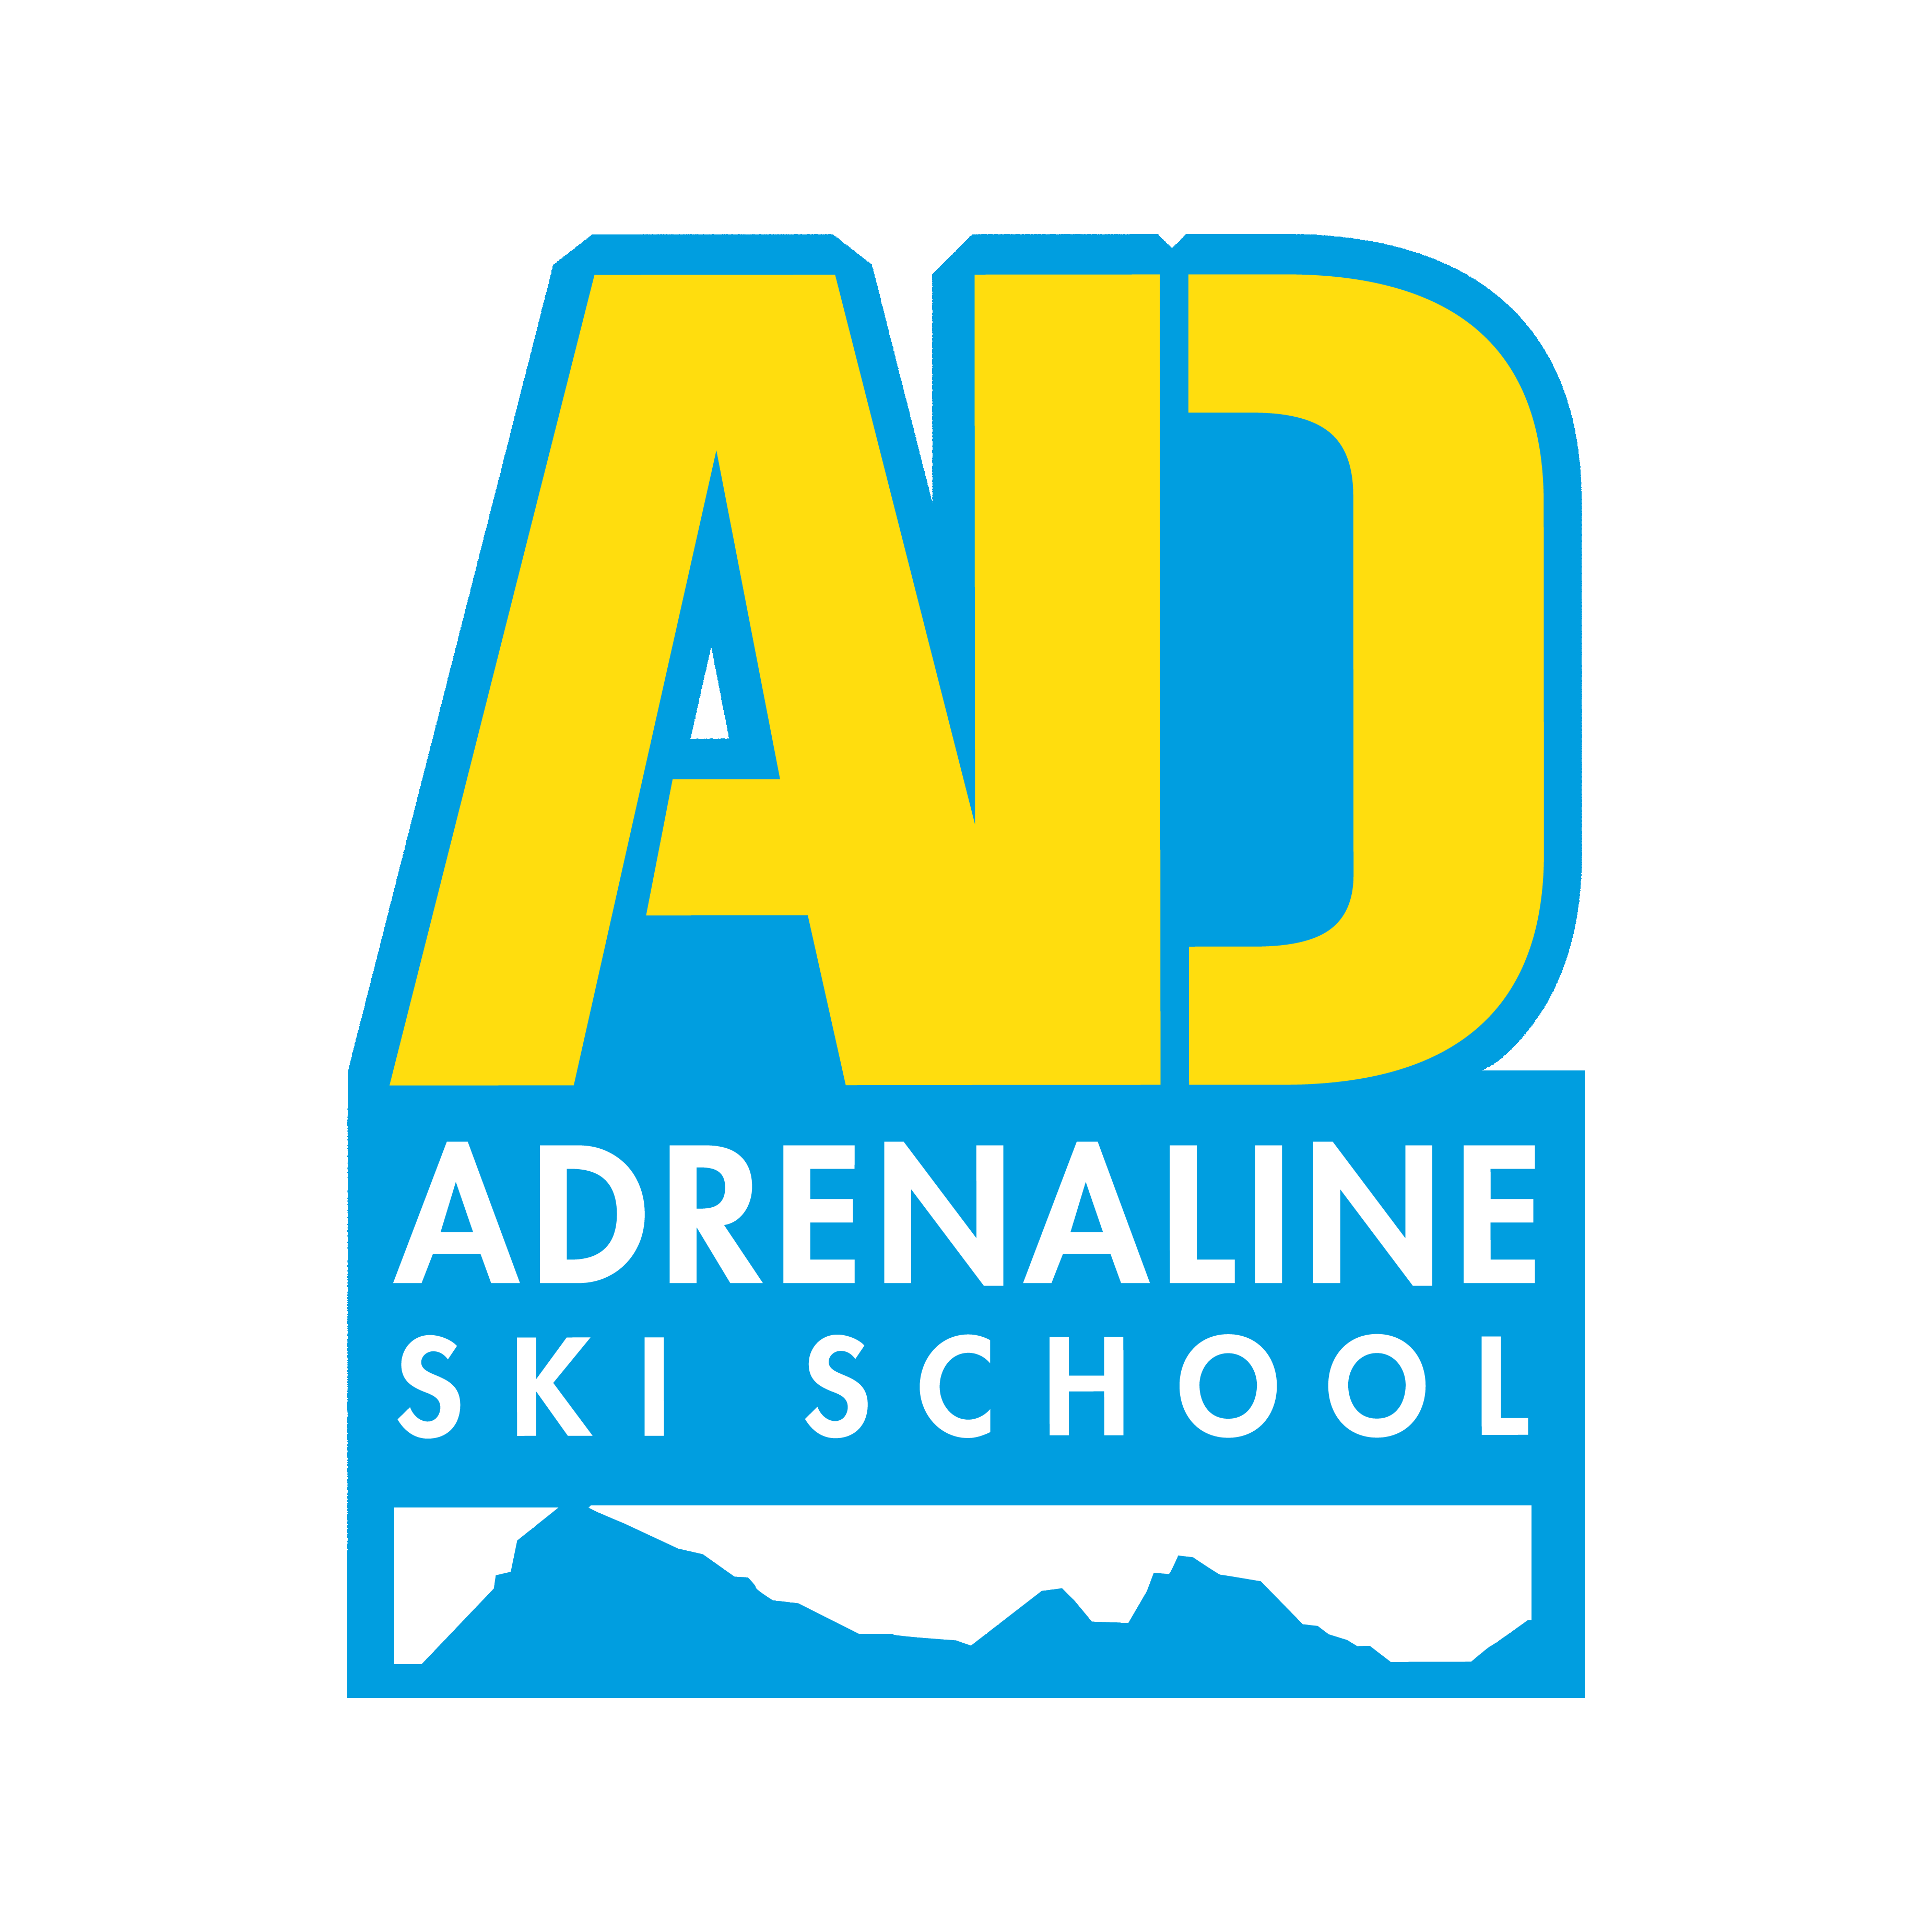 Adult Ski Lessons "6 Max" for All Levels from Adrenaline Ski School Verbier